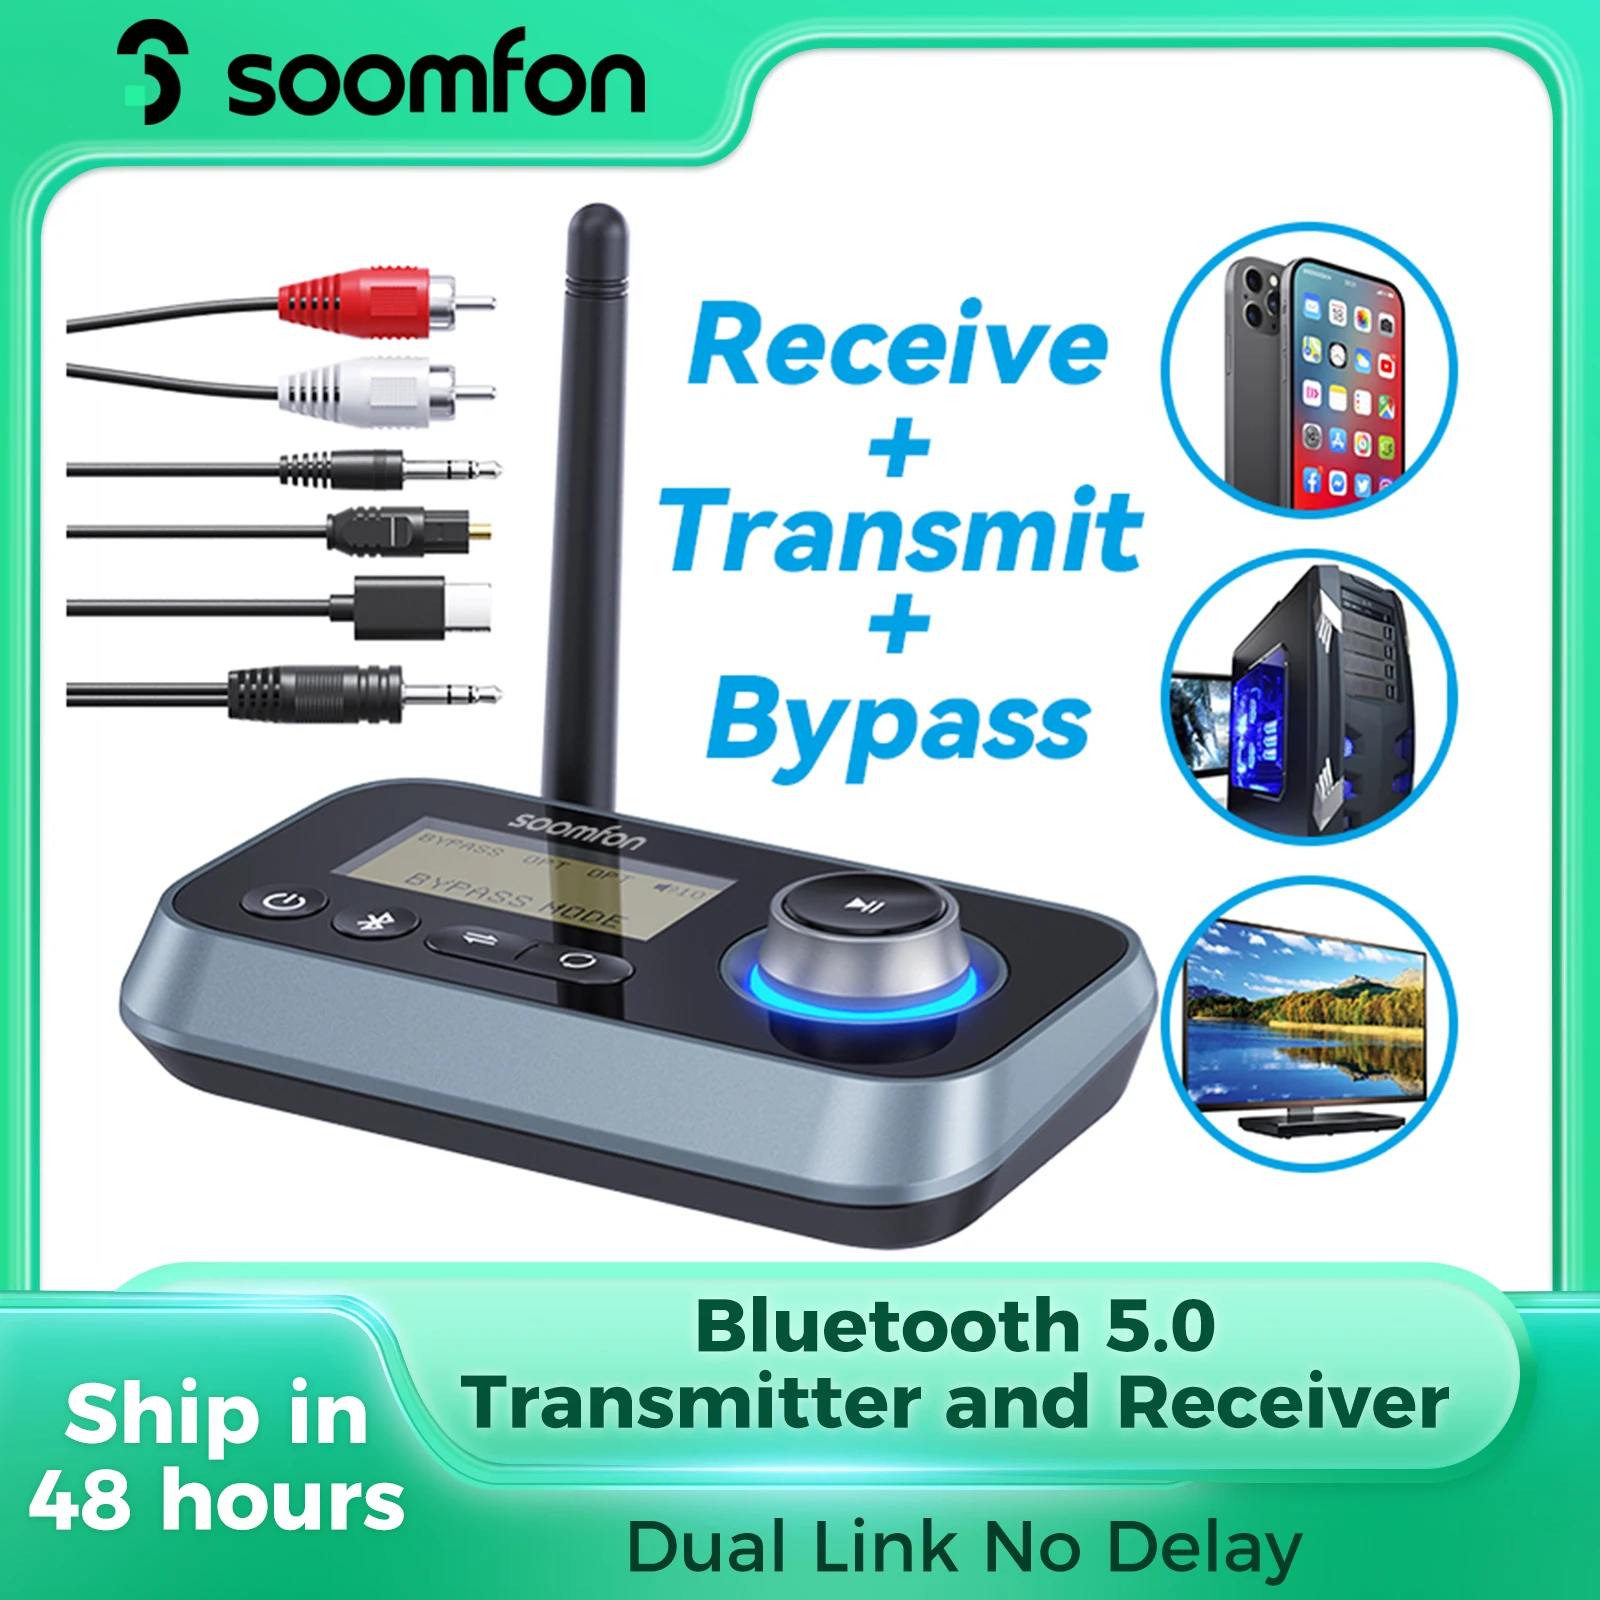 SOOMFON 3-in-1Bluetooth Transmitter Receiver for TV Bluetooth 5.0 Audio Adapter with 3.5mm Aux RCA Optical Cable for Home Stereo